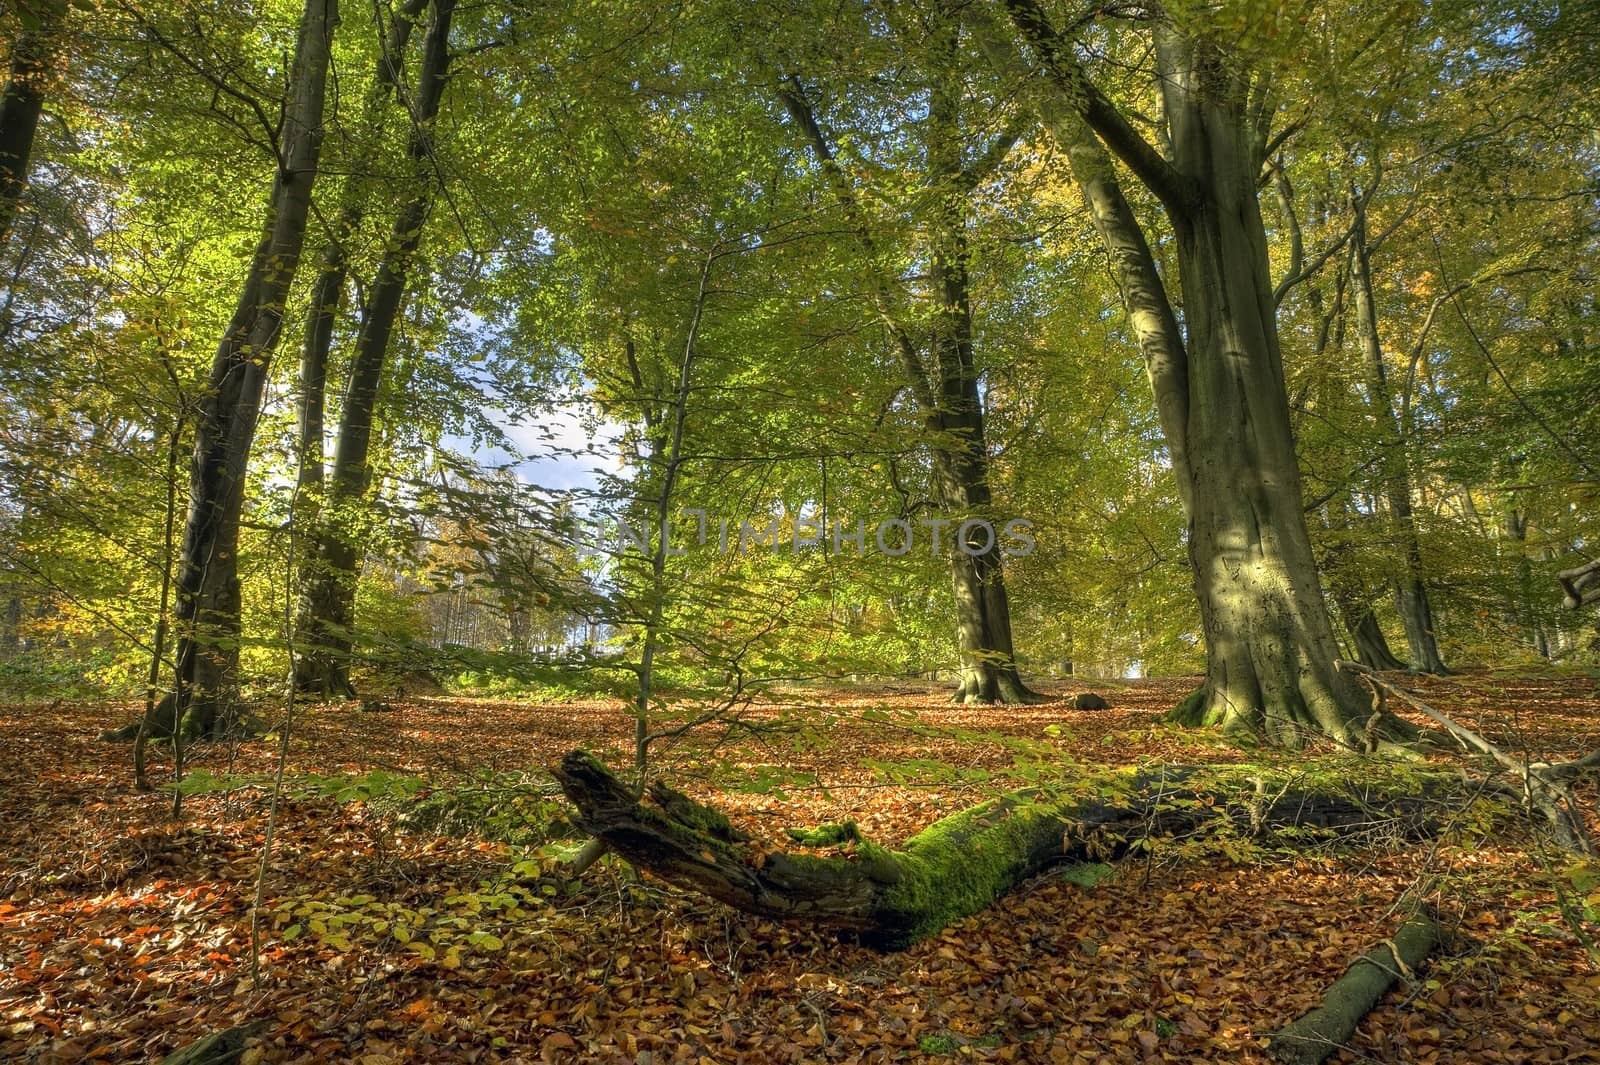 Beech wood in autumn, Worcestershire, England.